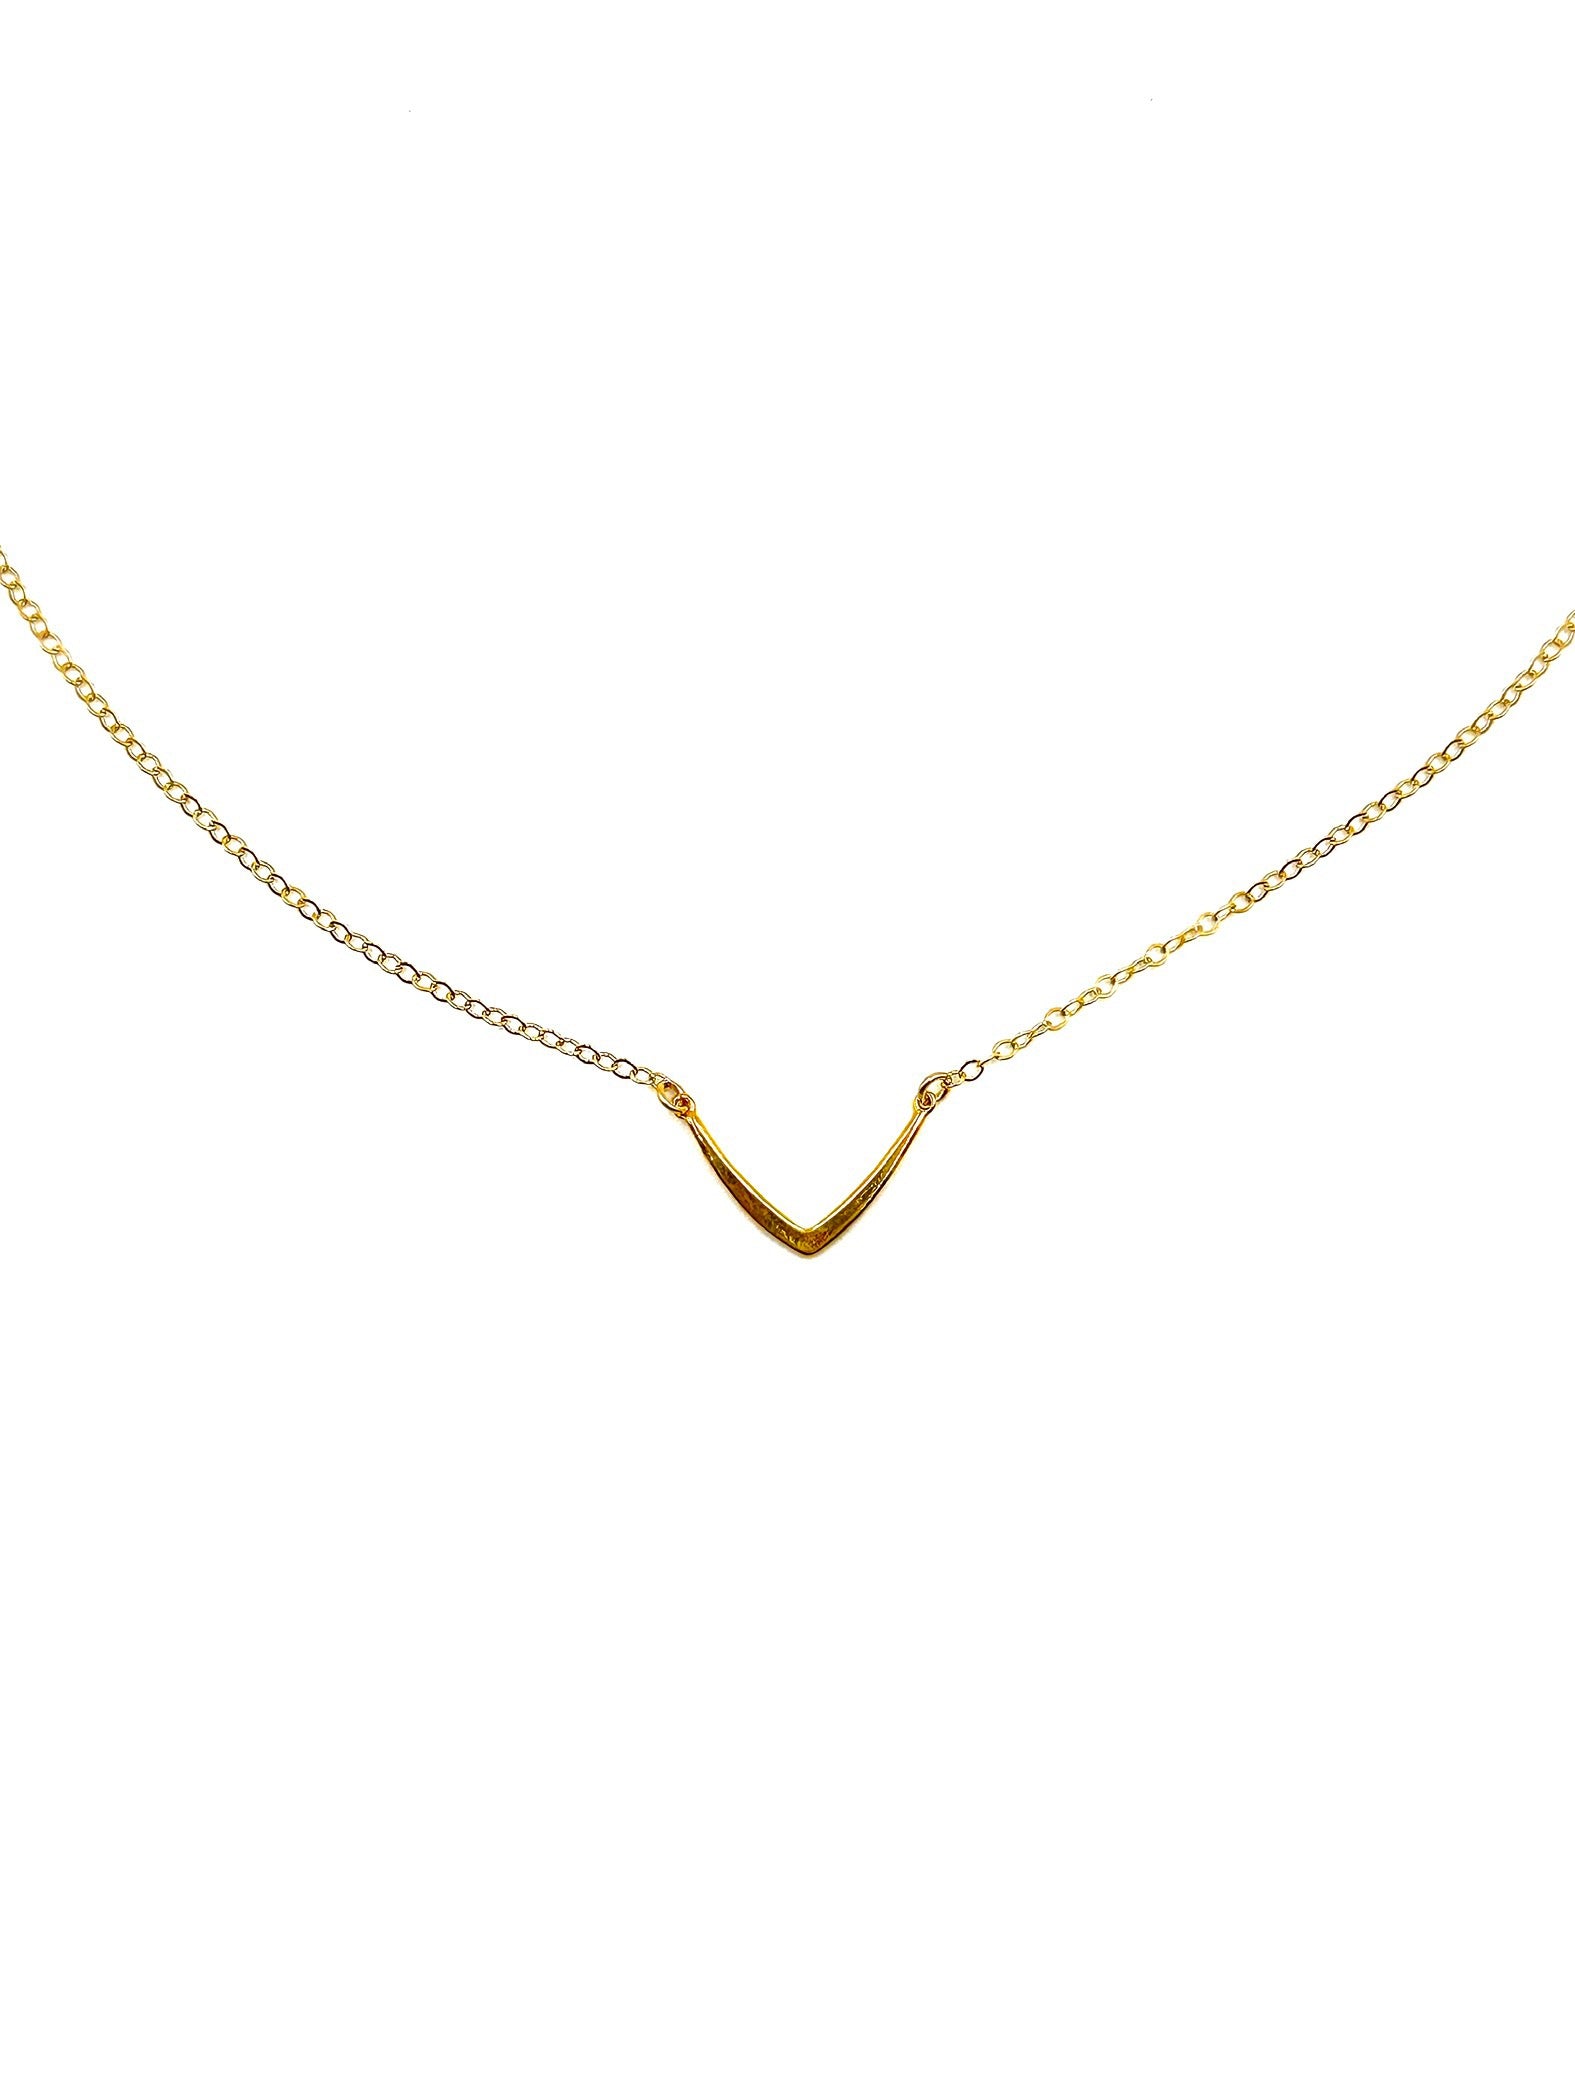 Val necklace-necklace